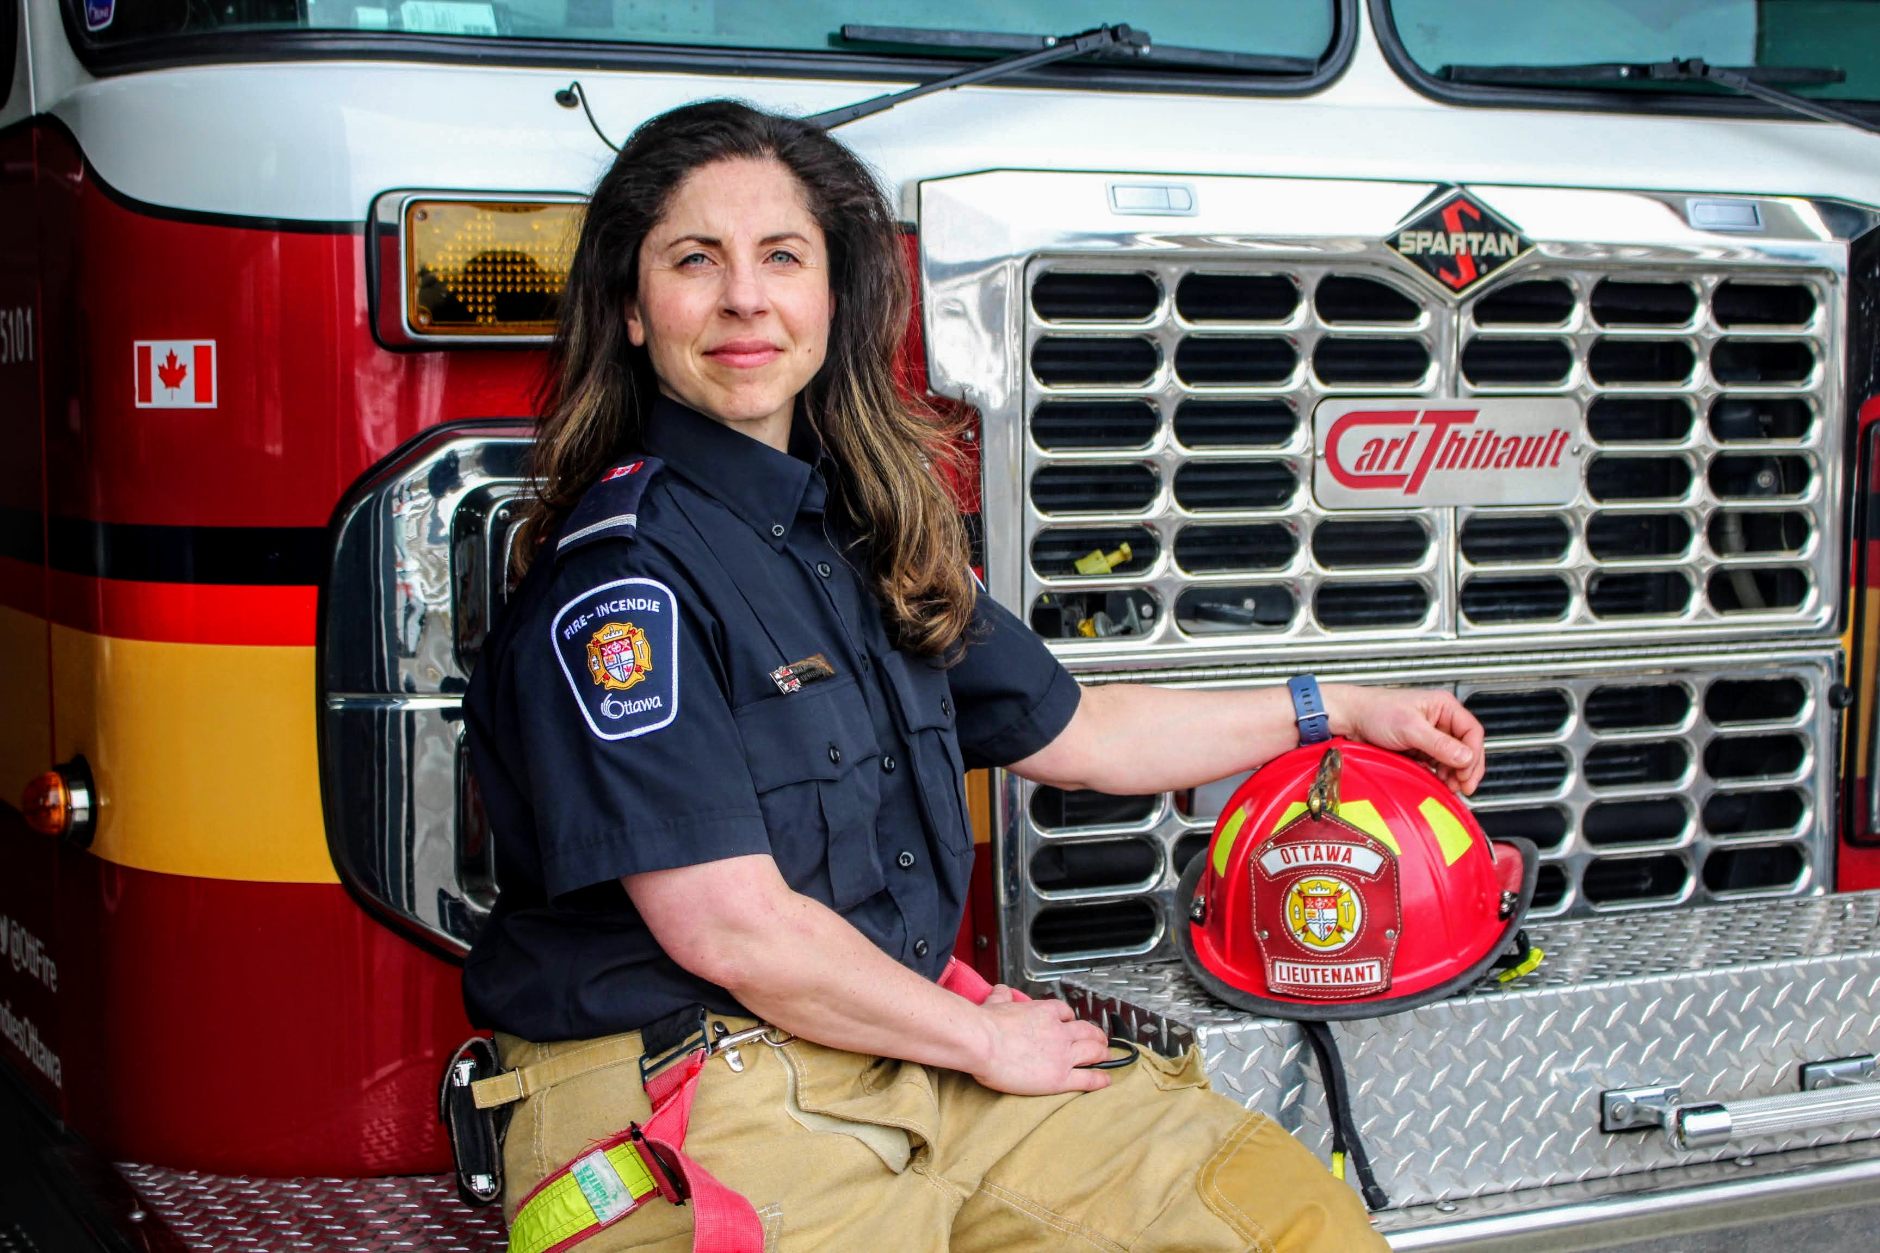  Woman firefighter sitting in front of fire truck